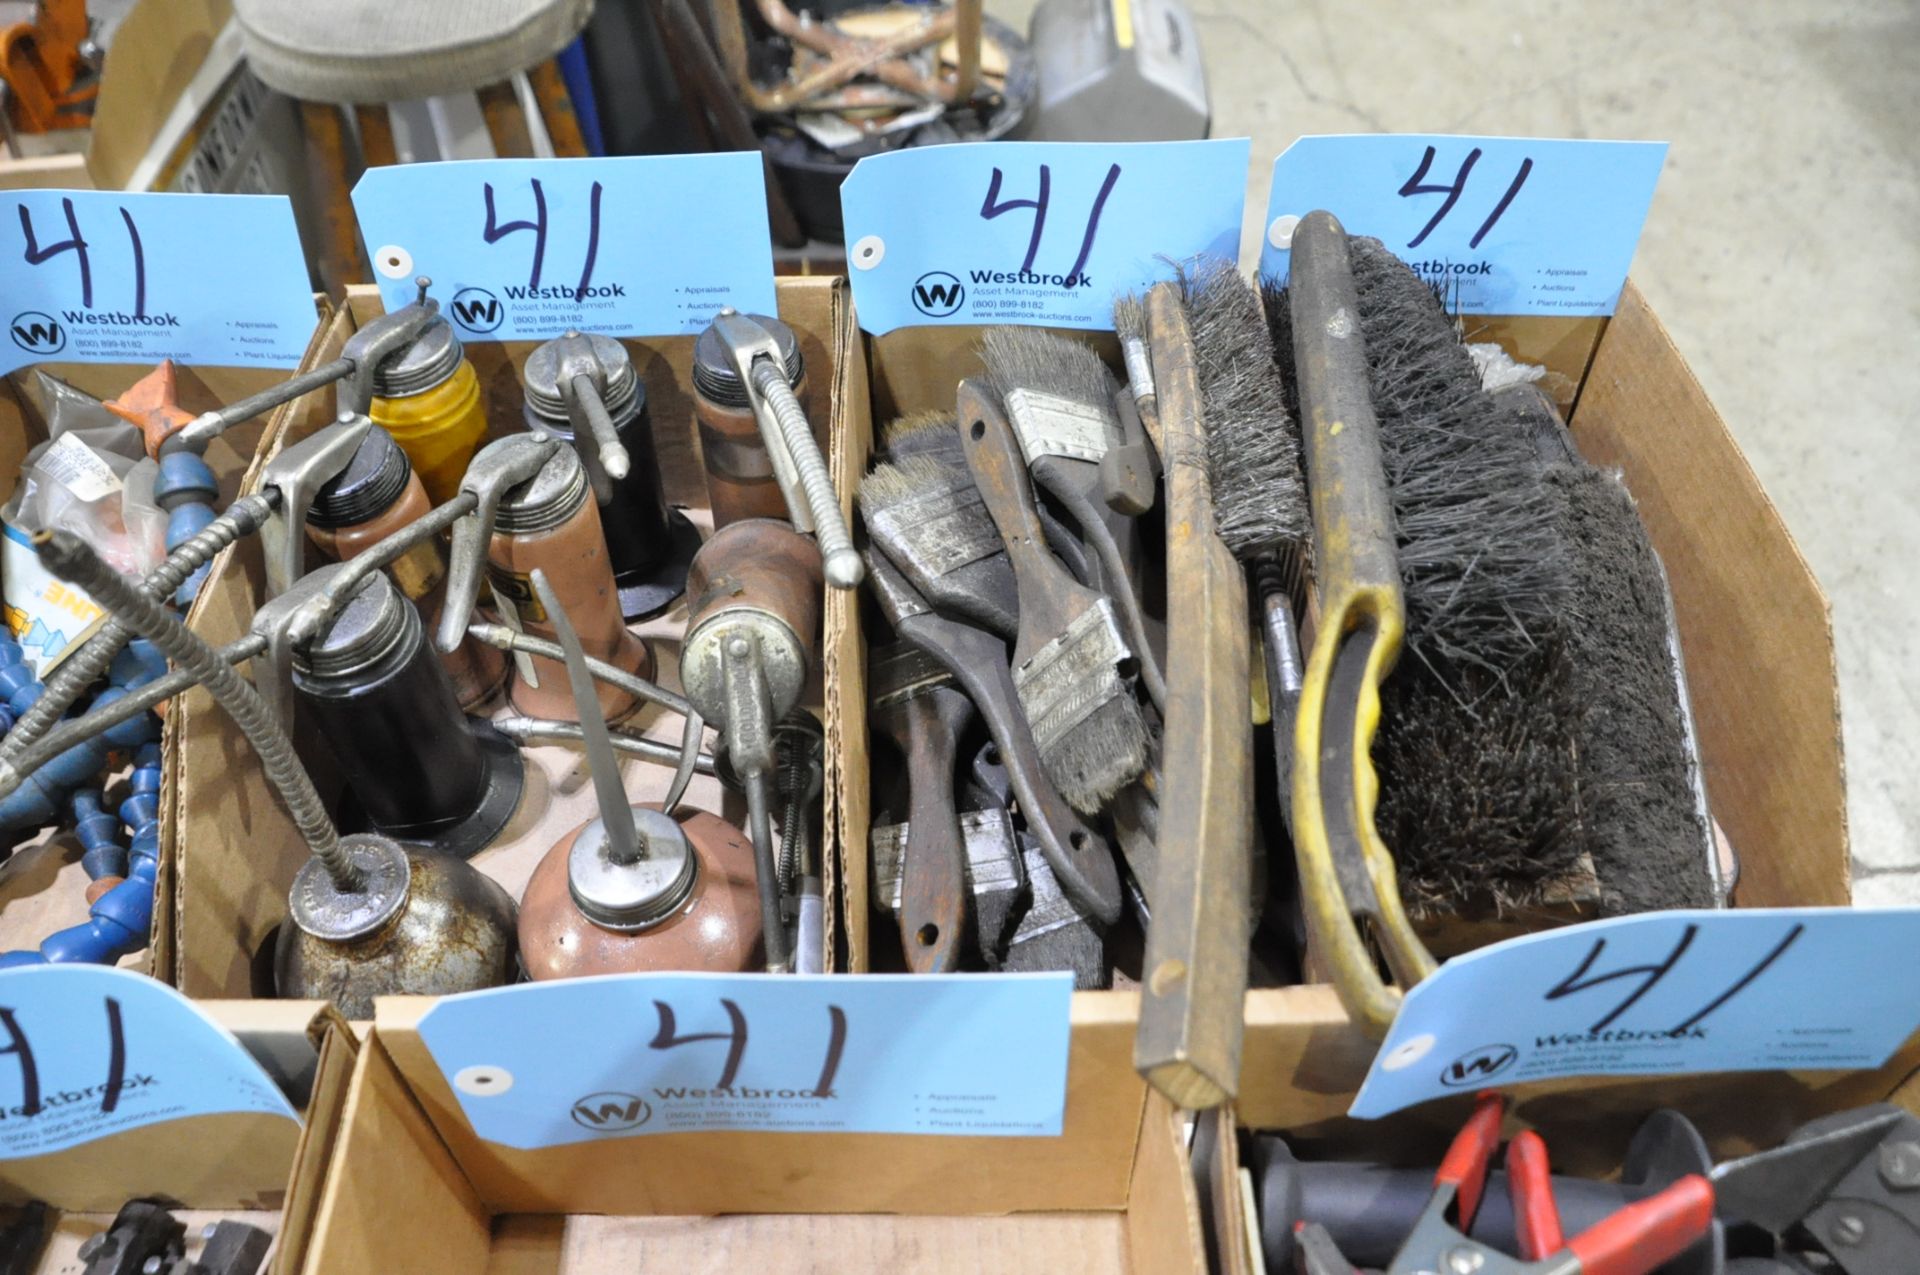 Lot-Squeegees, Brushes, Oil Squirt Cans, Machine Handles, Electric Connectors, Smoke Detector, Etc. - Image 3 of 6